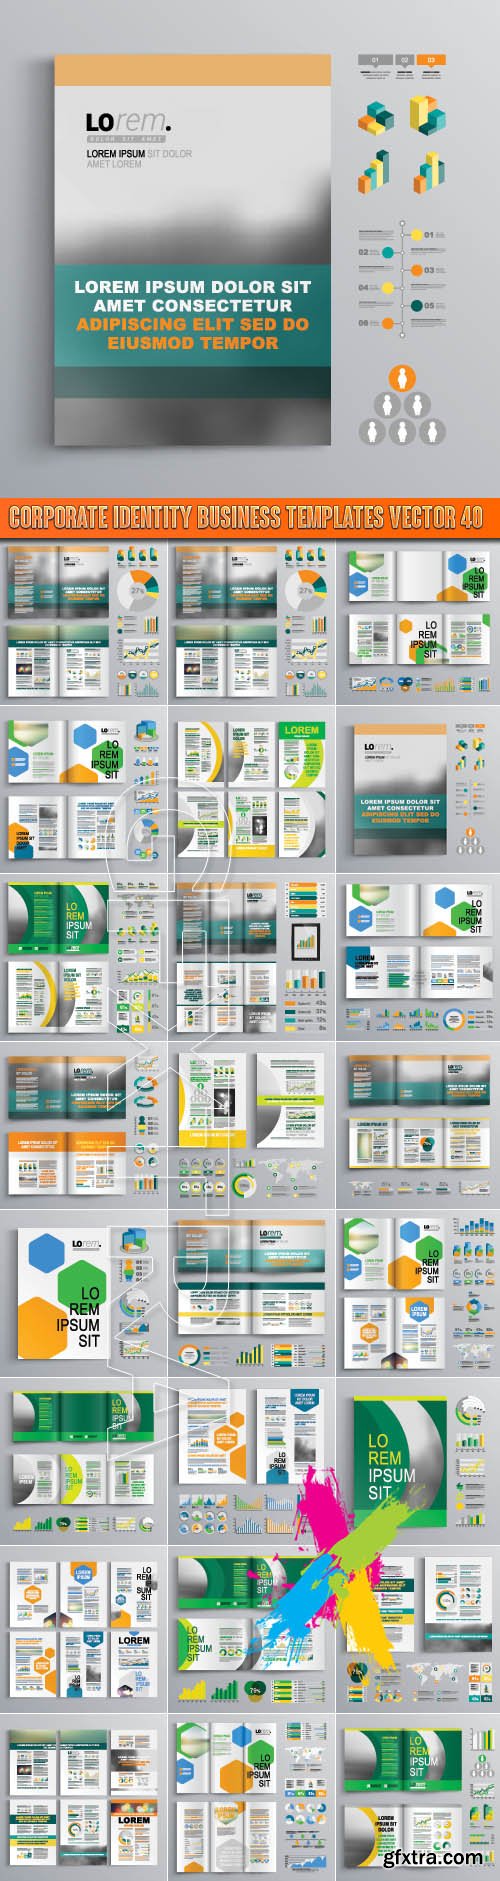 Corporate identity business templates vector 40